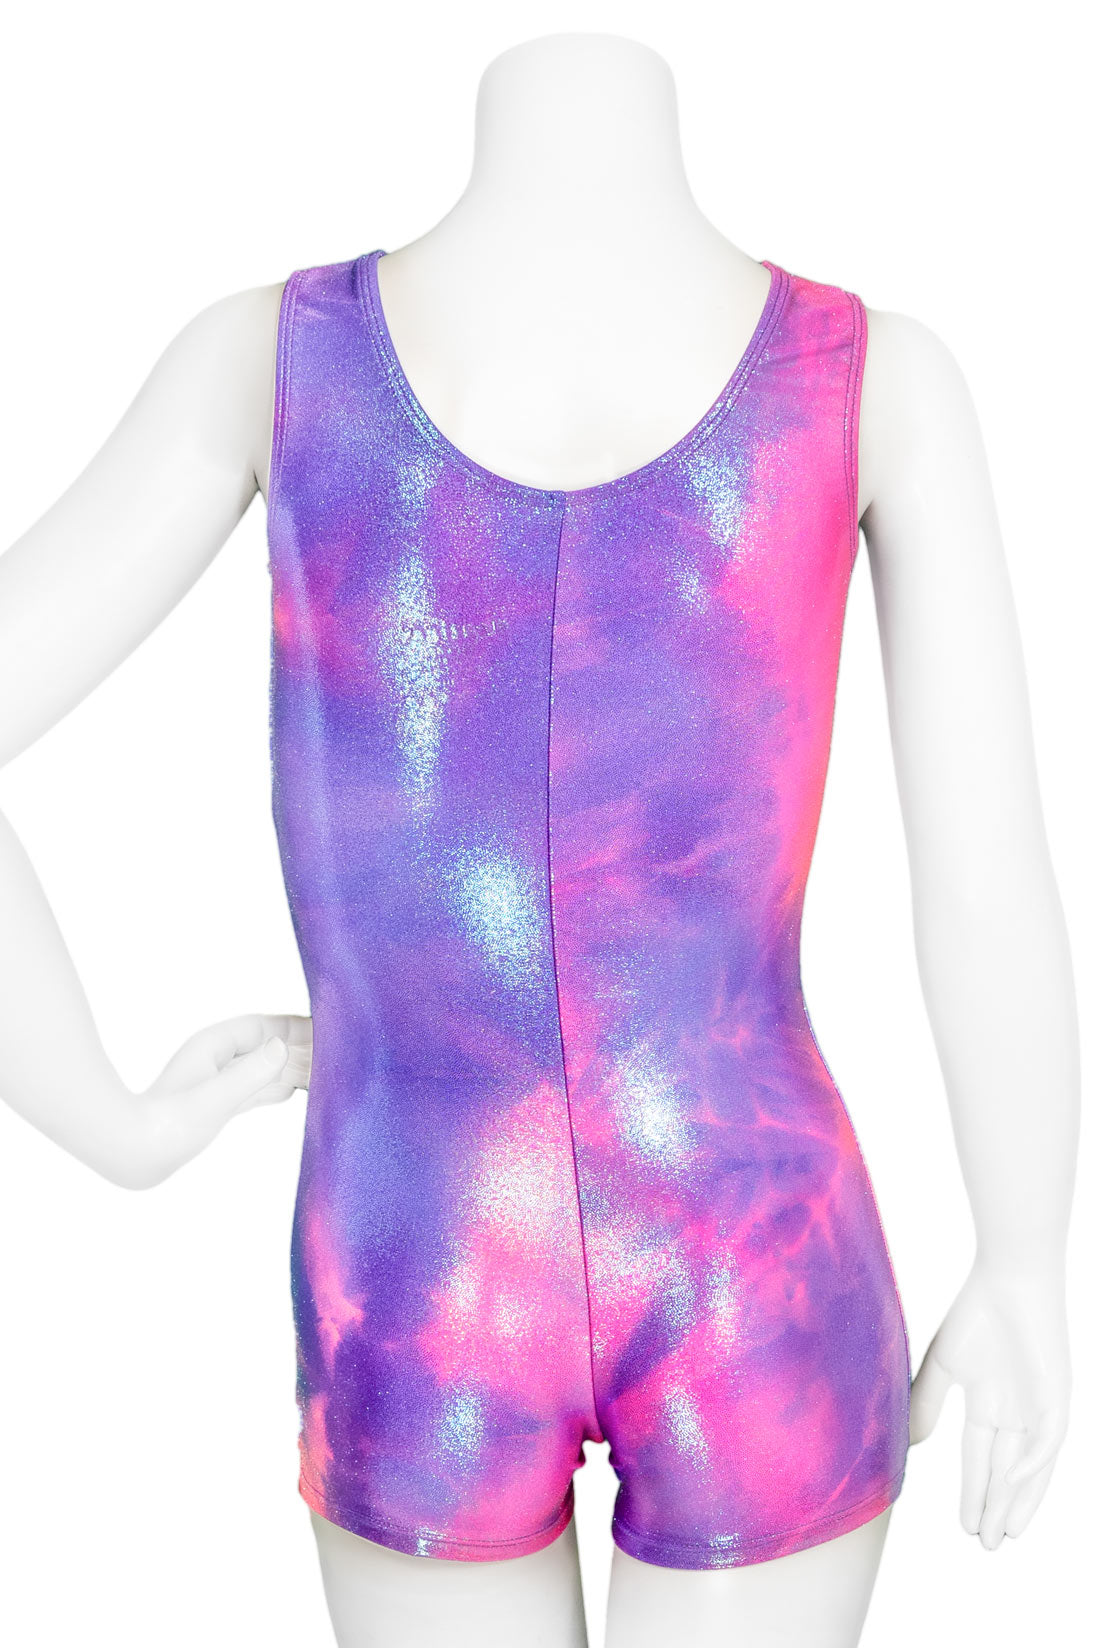 Back of a pink and purple shiny unitard for gymnastics practice by Destira, 2023